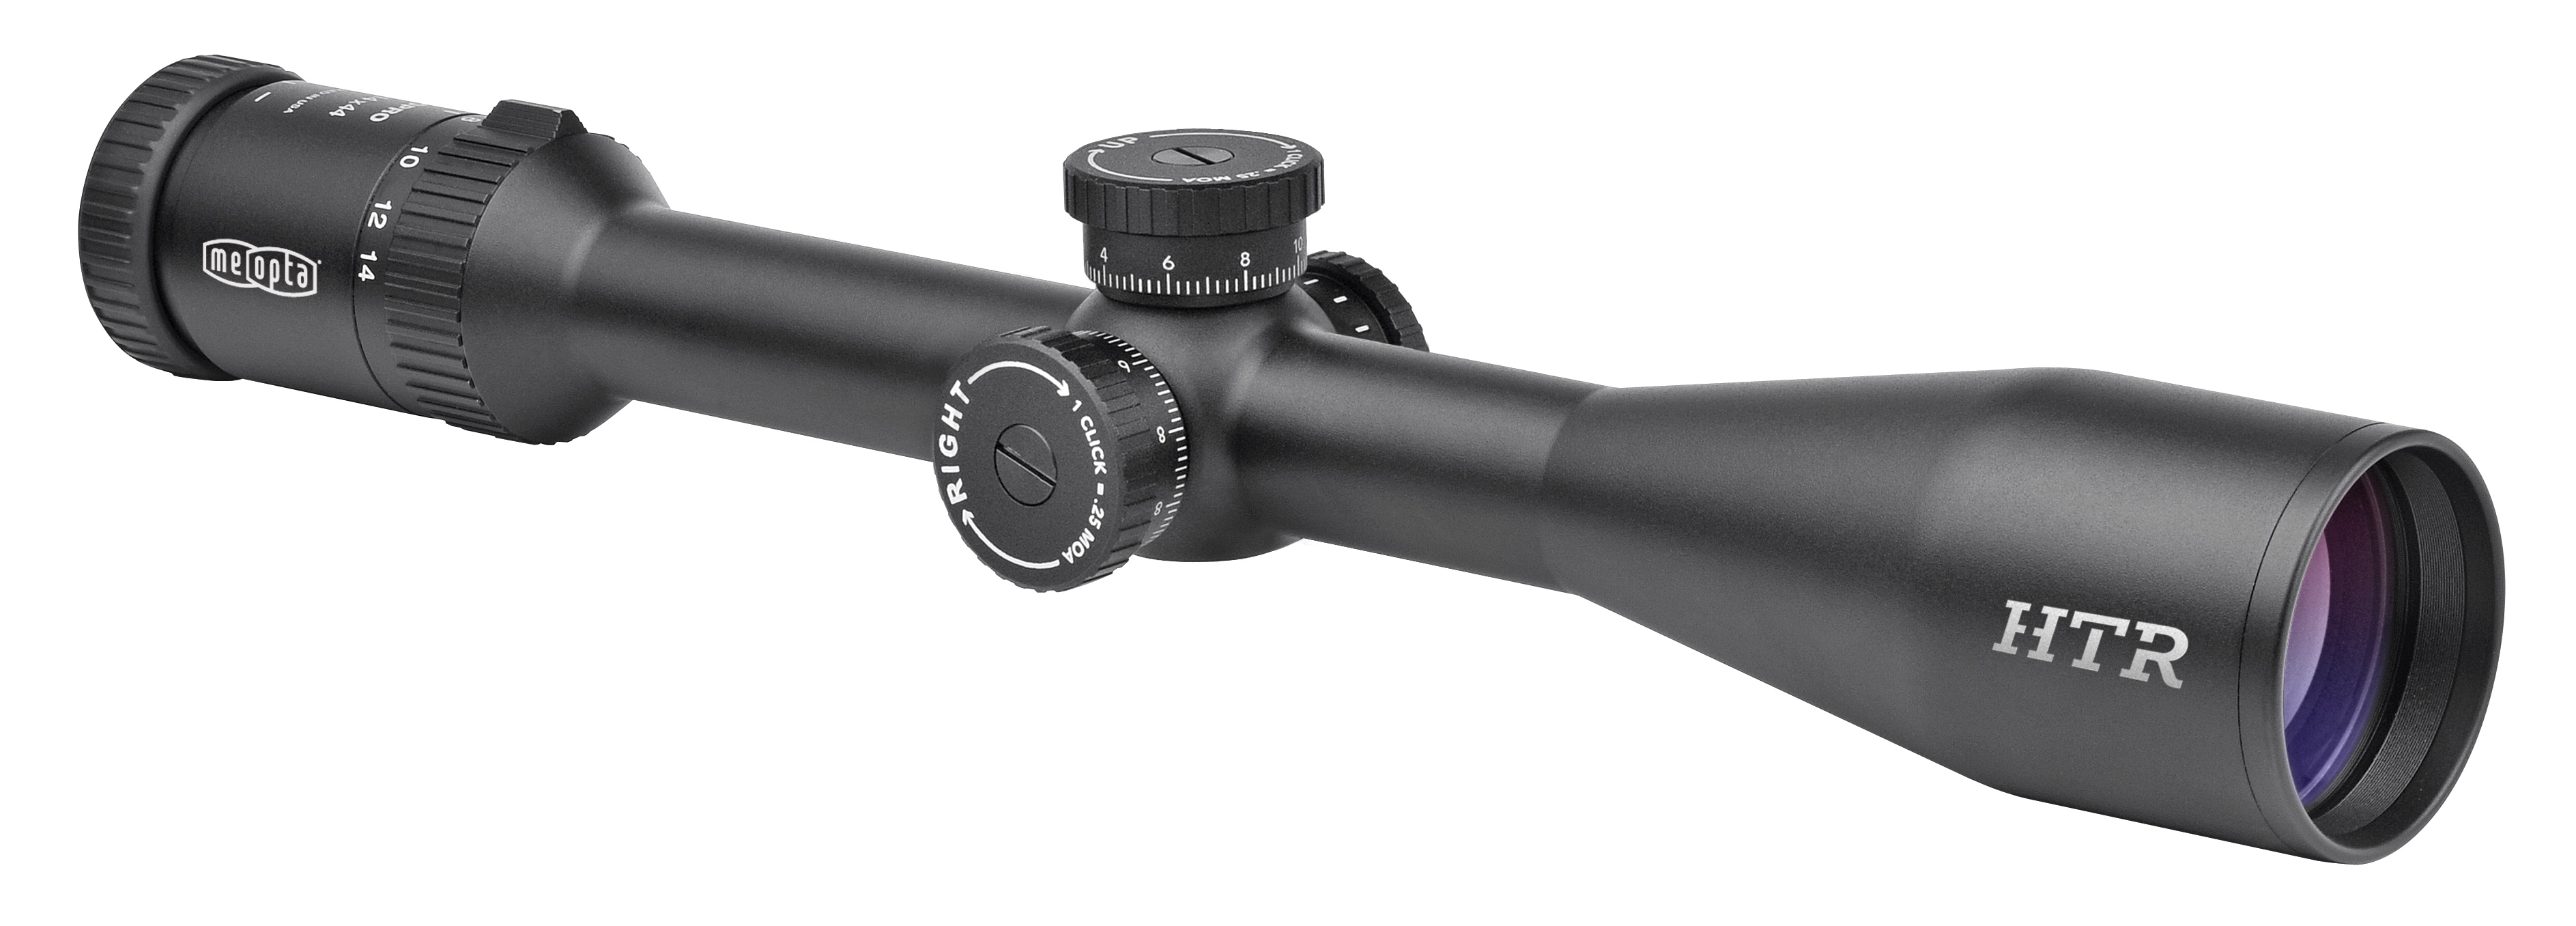 MEOPRO - 4.5-14x44 HTR with Z-Plex Reticle - MEO598960